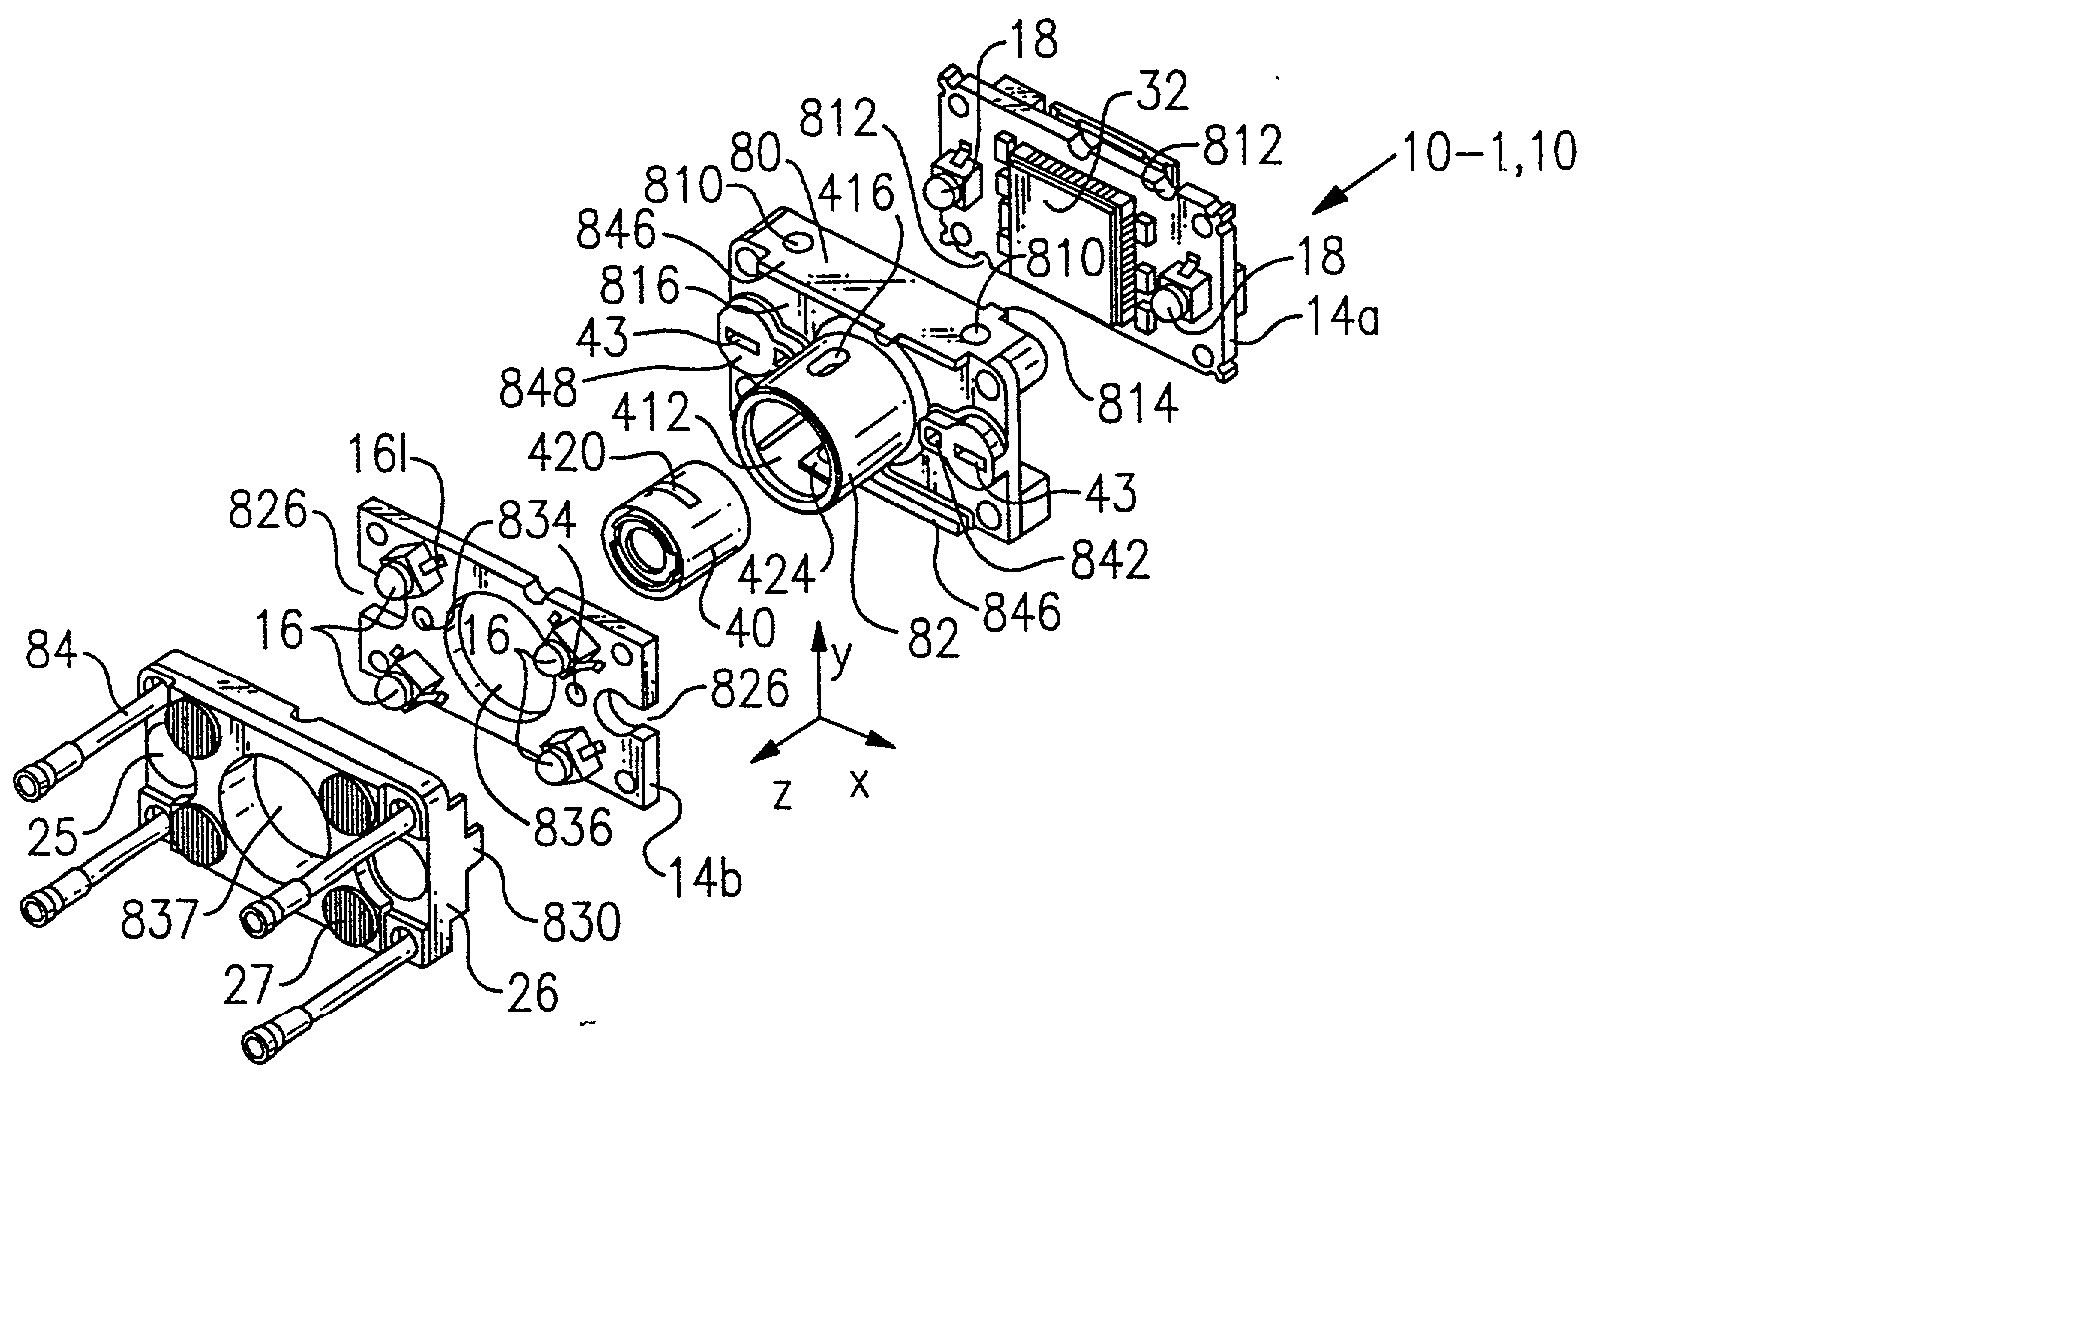 Optical reader aiming assembly comprising aperture